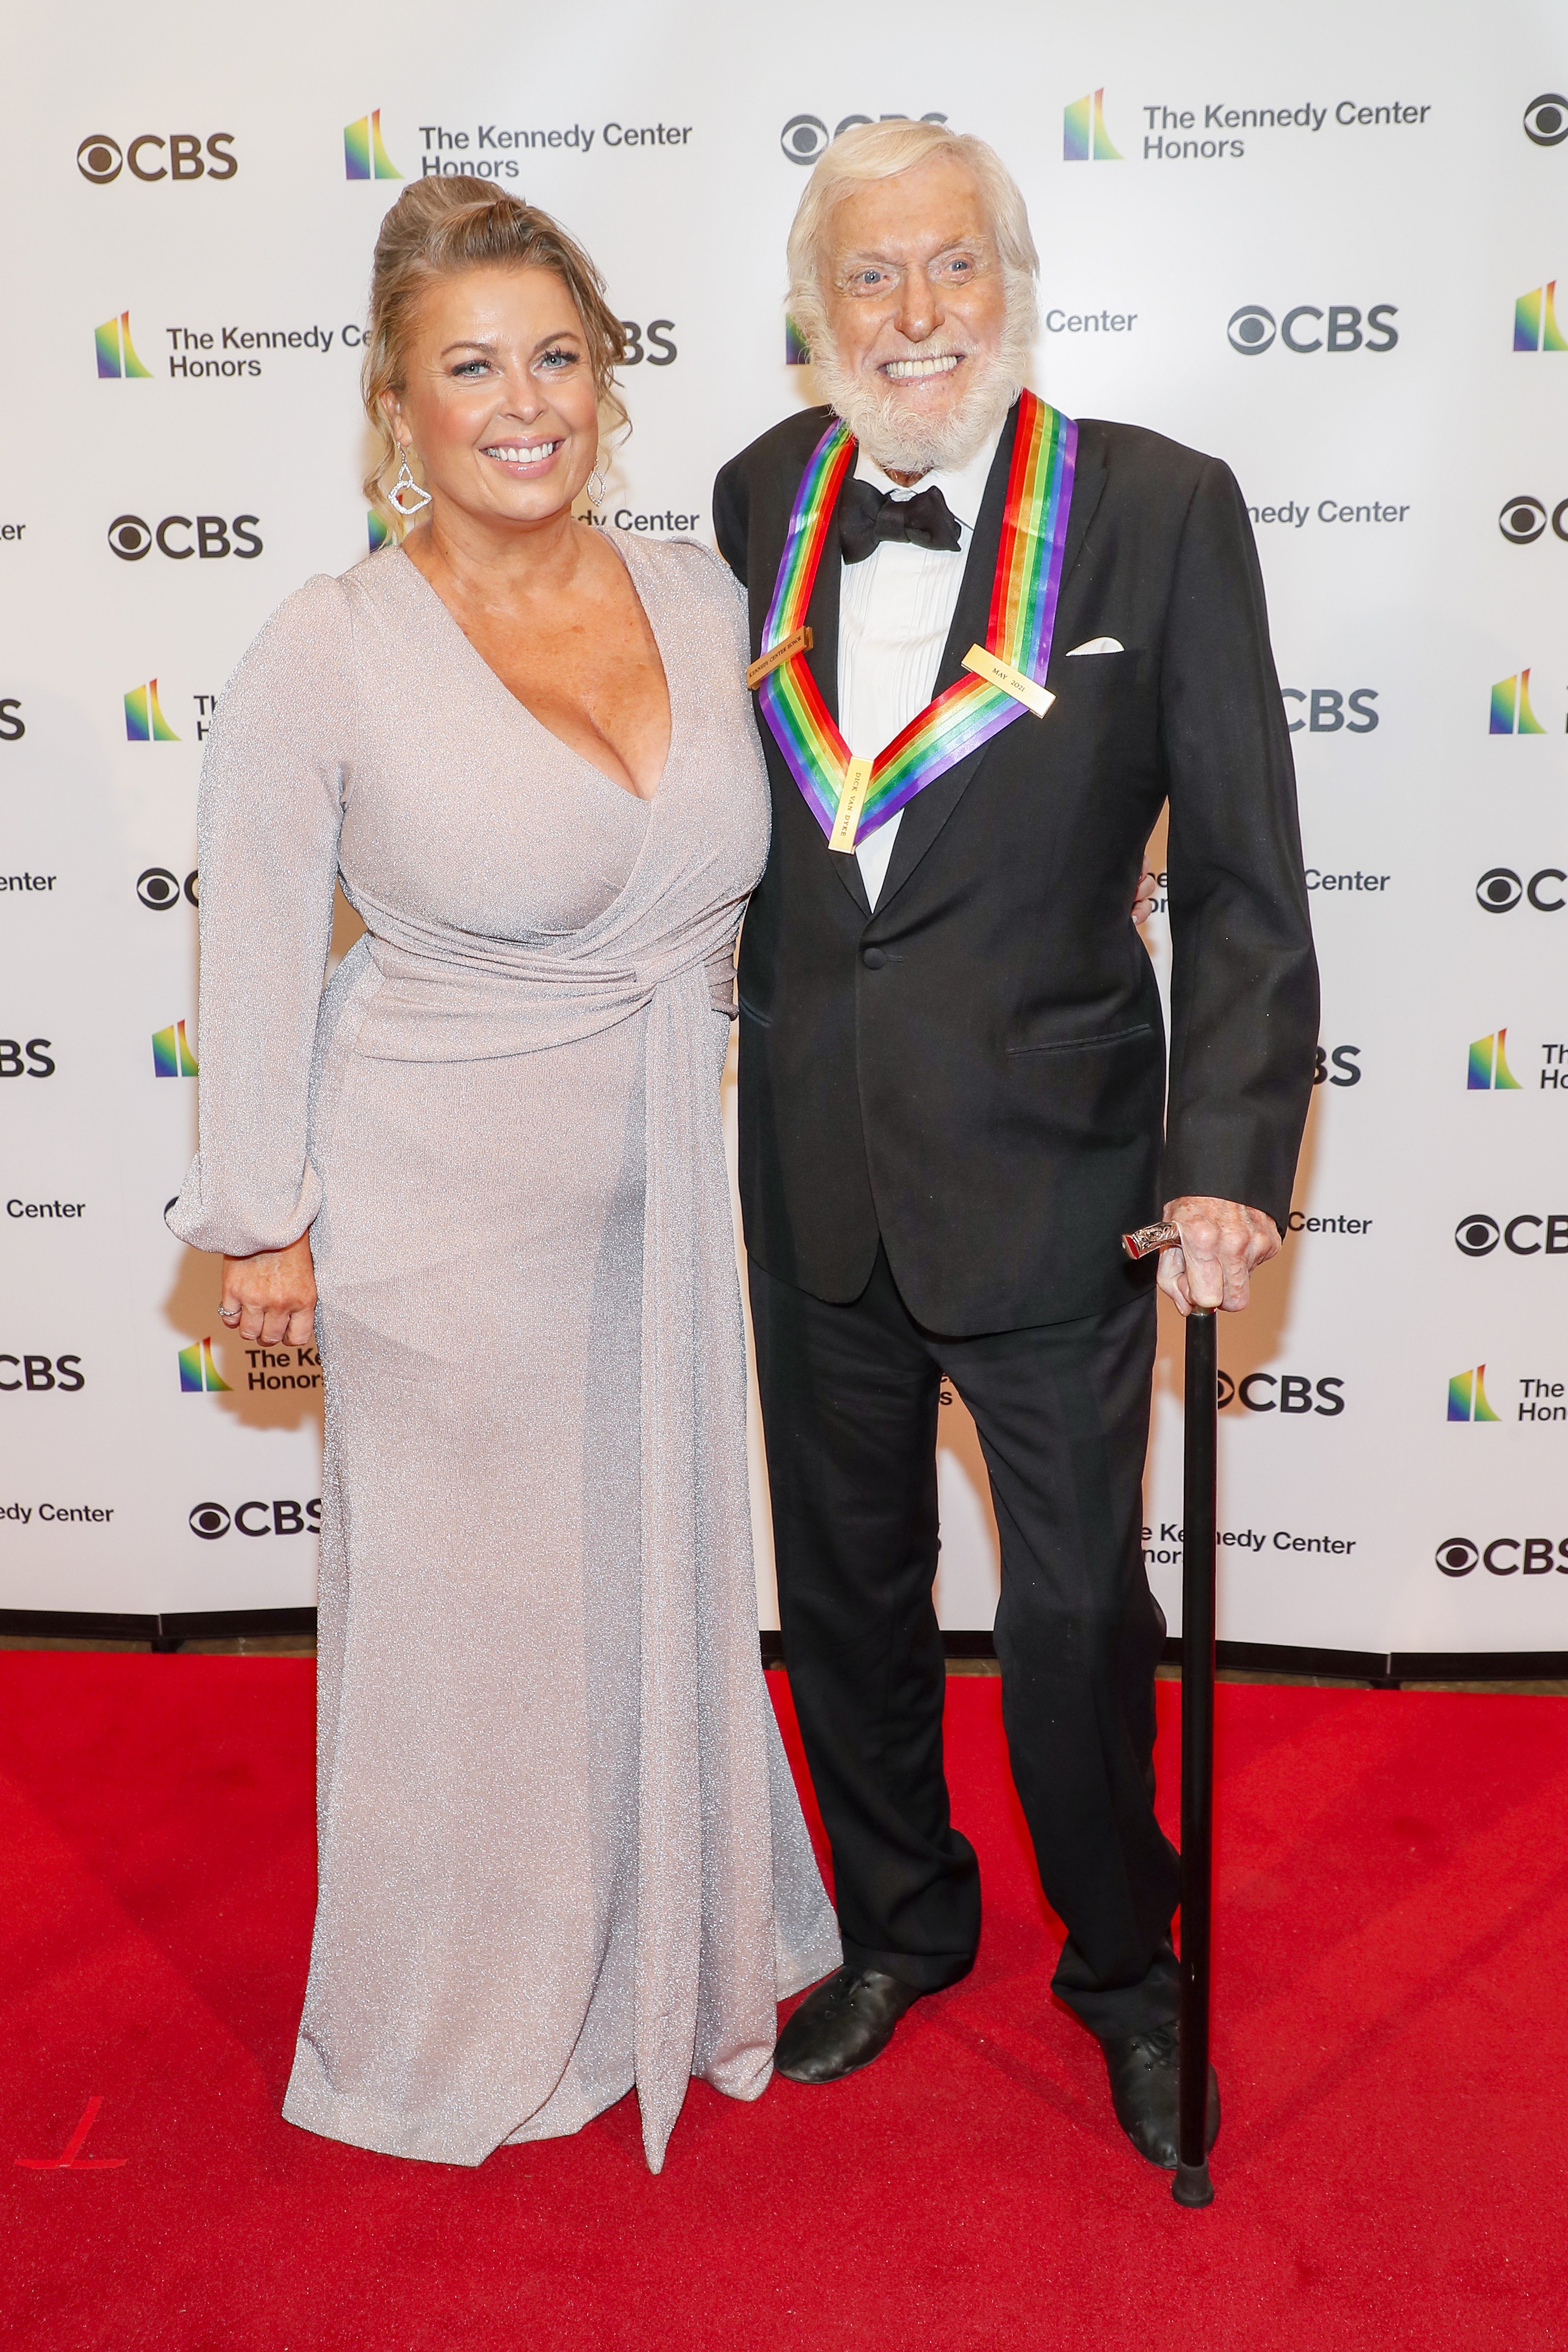 Arlene Silver and Dick Van Dyke at the 43rd Annual Kennedy Center Honors in Washington, D.C on May 21, 2021. | Source: Getty Images 